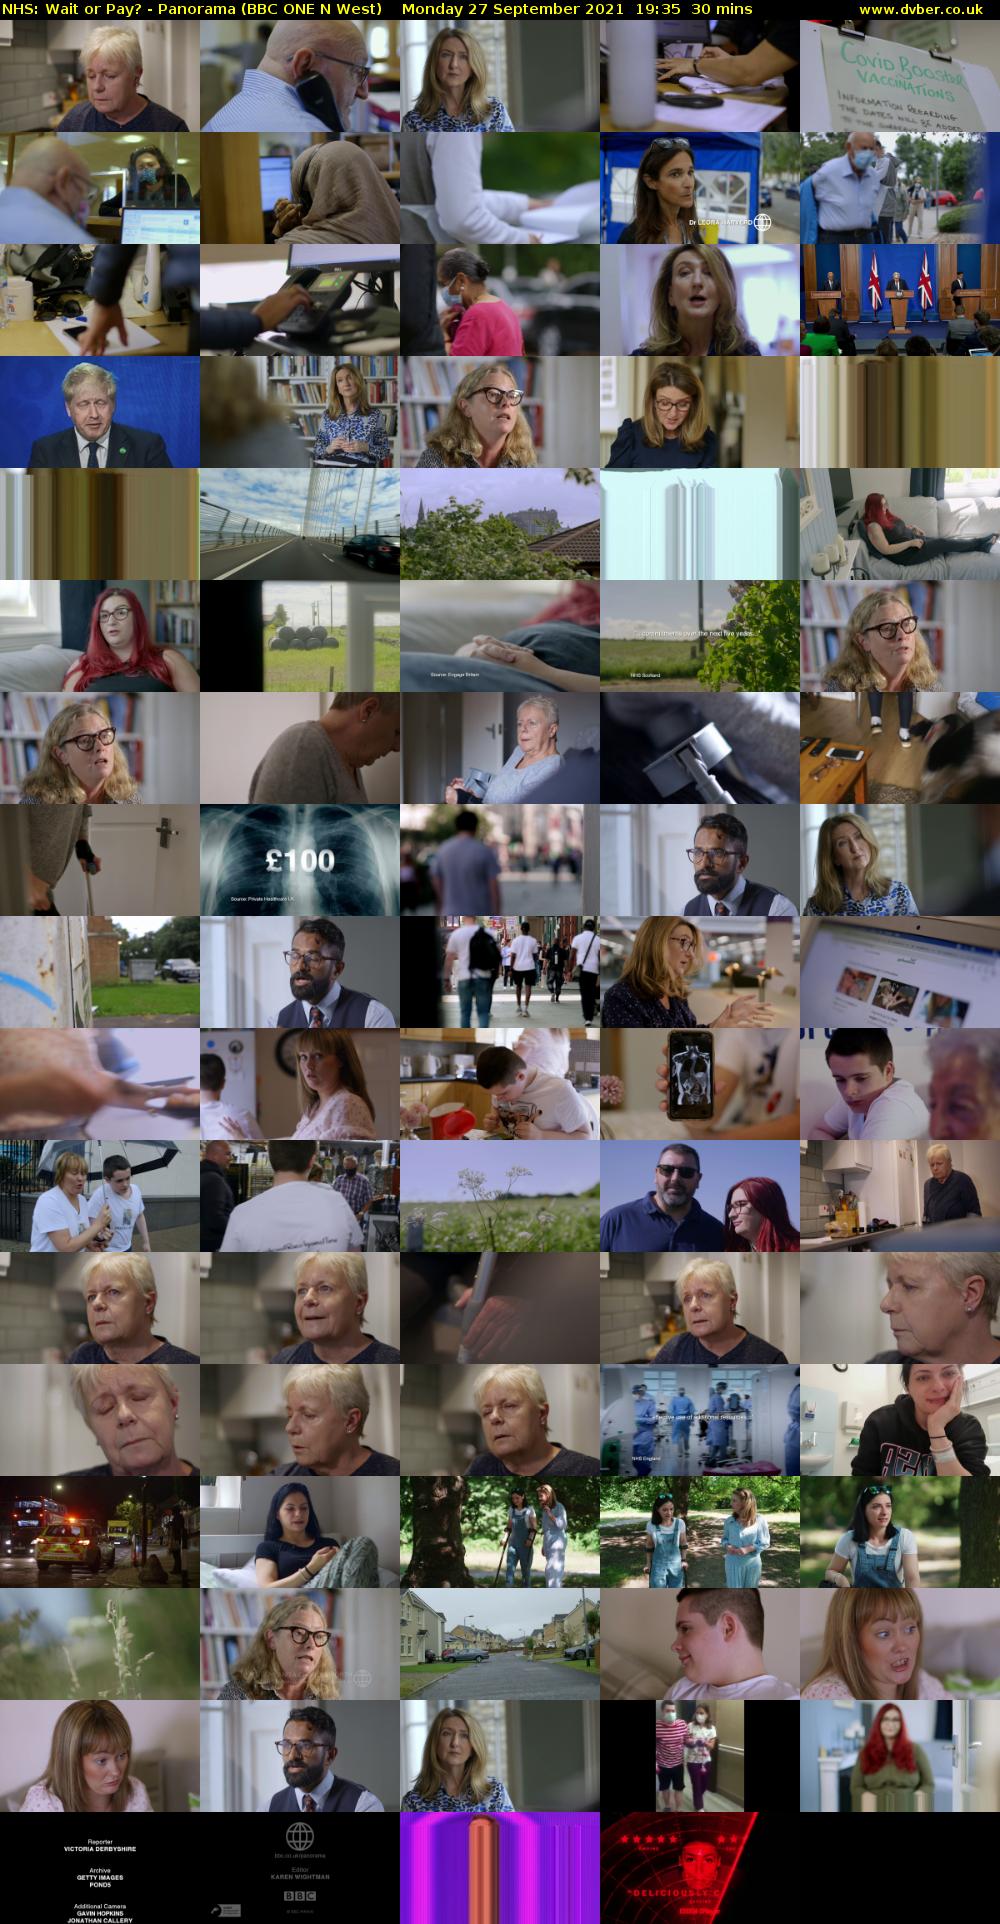 NHS: Wait or Pay? - Panorama (BBC ONE N West) Monday 27 September 2021 19:35 - 20:05